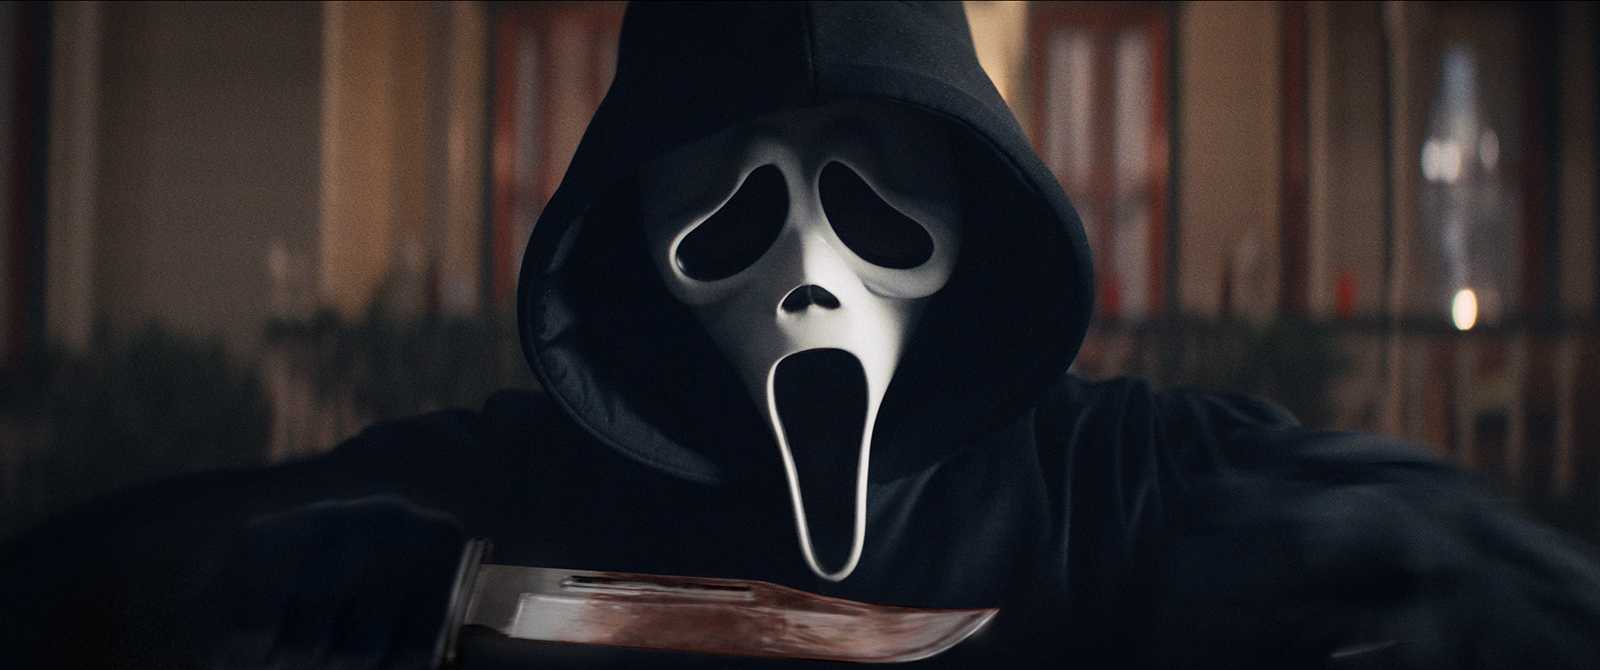 Ghostface returns in the fifth installment of the iconic horror series. (Courtesy Paramount Pictures and Spyglass Media Group/Tribune News Service)